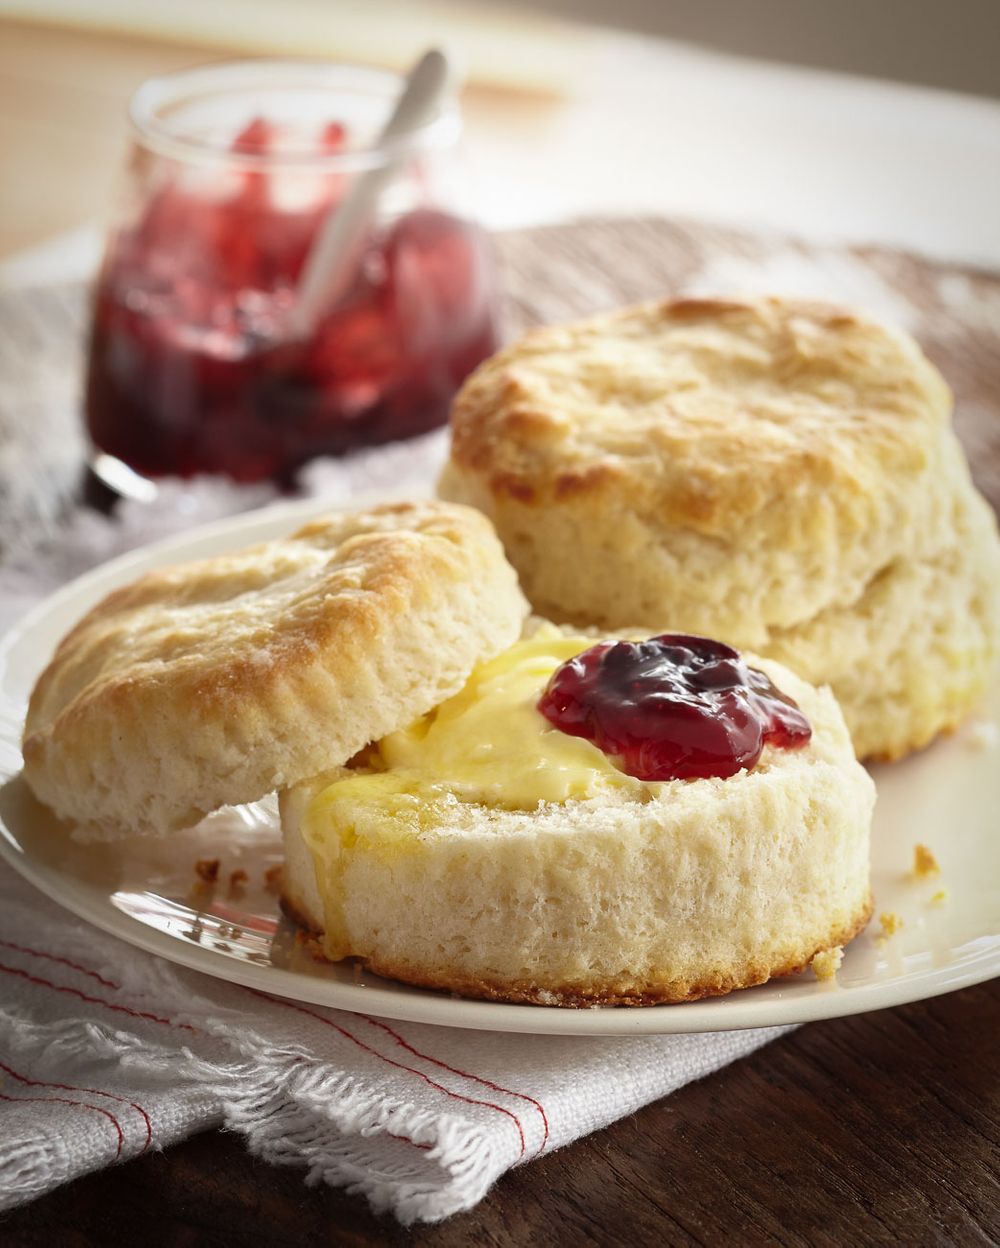 Biscuits and jam